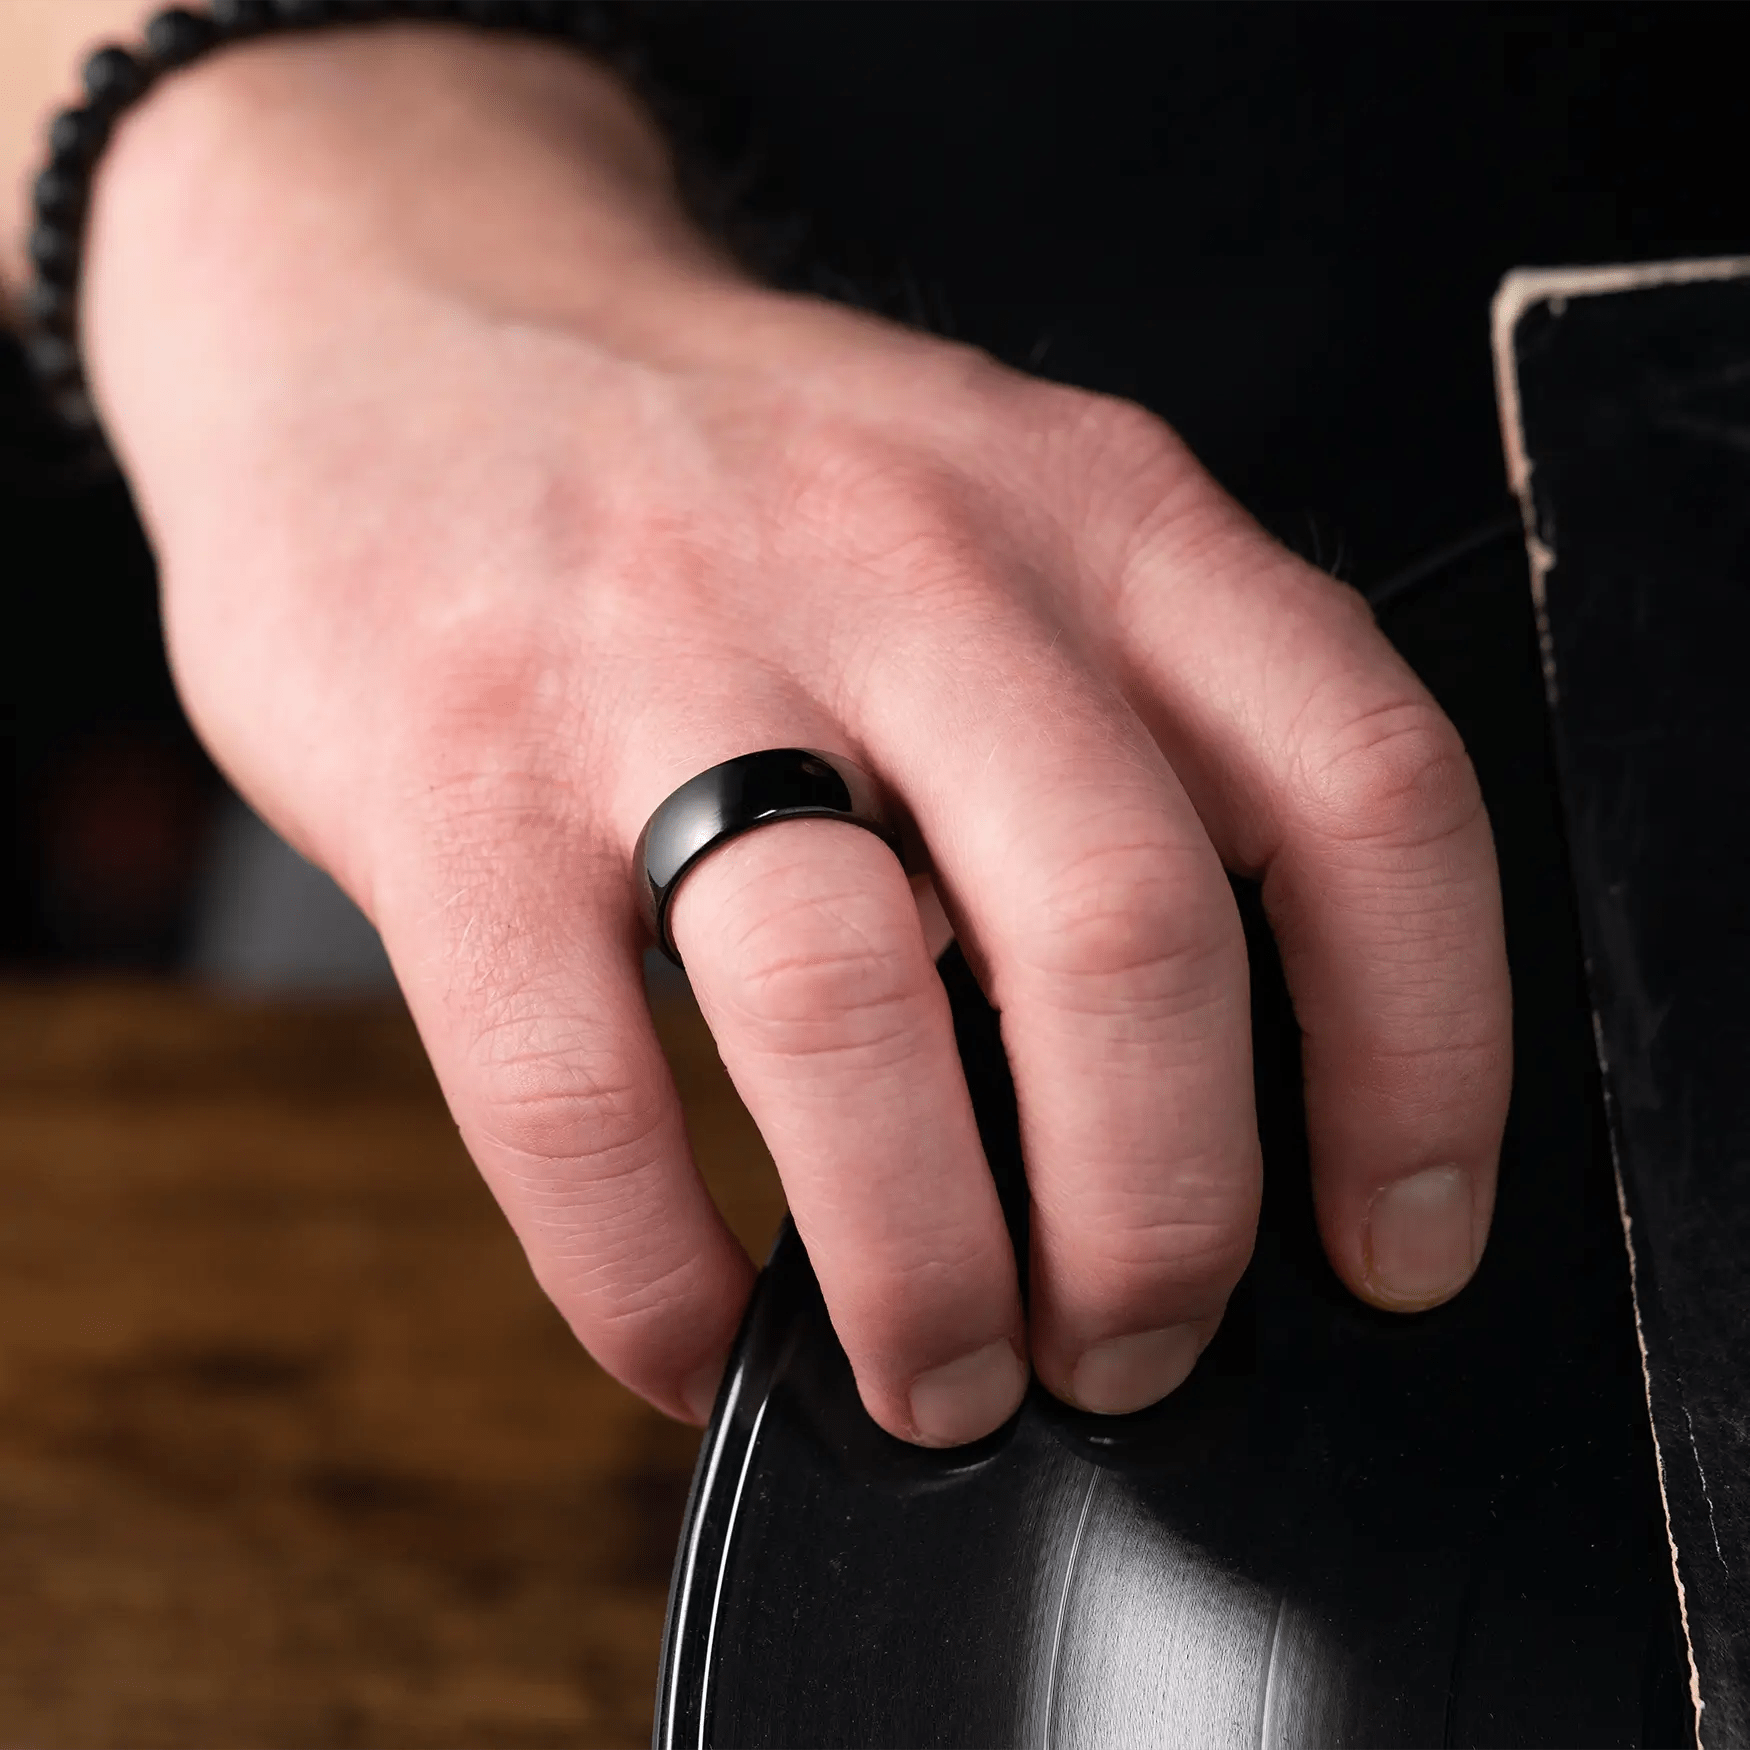 How to Wear Wedding Rings: Proper Band Placement | Gema&Co